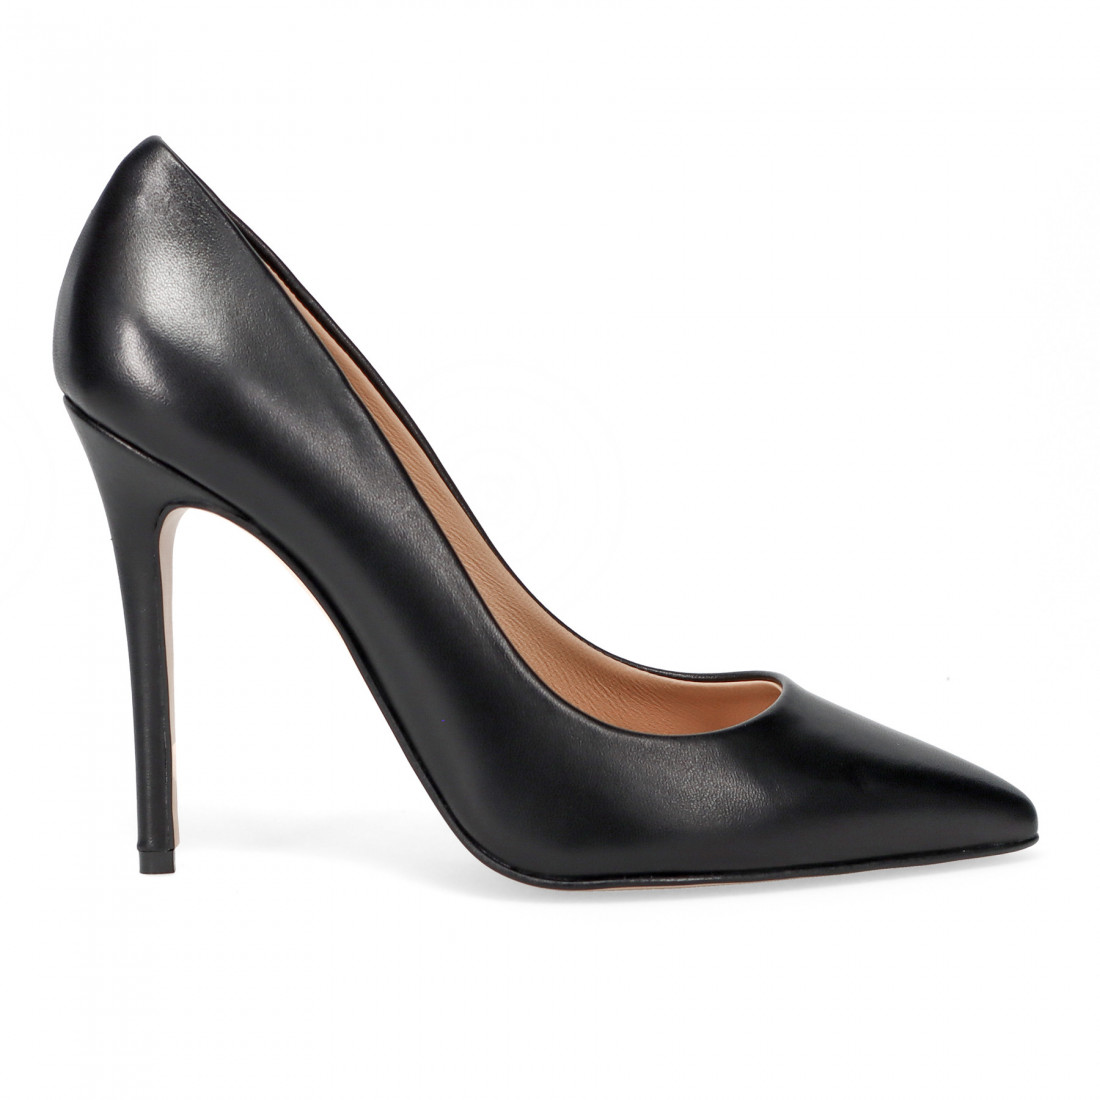 Black soft leather Audley pump with high heel